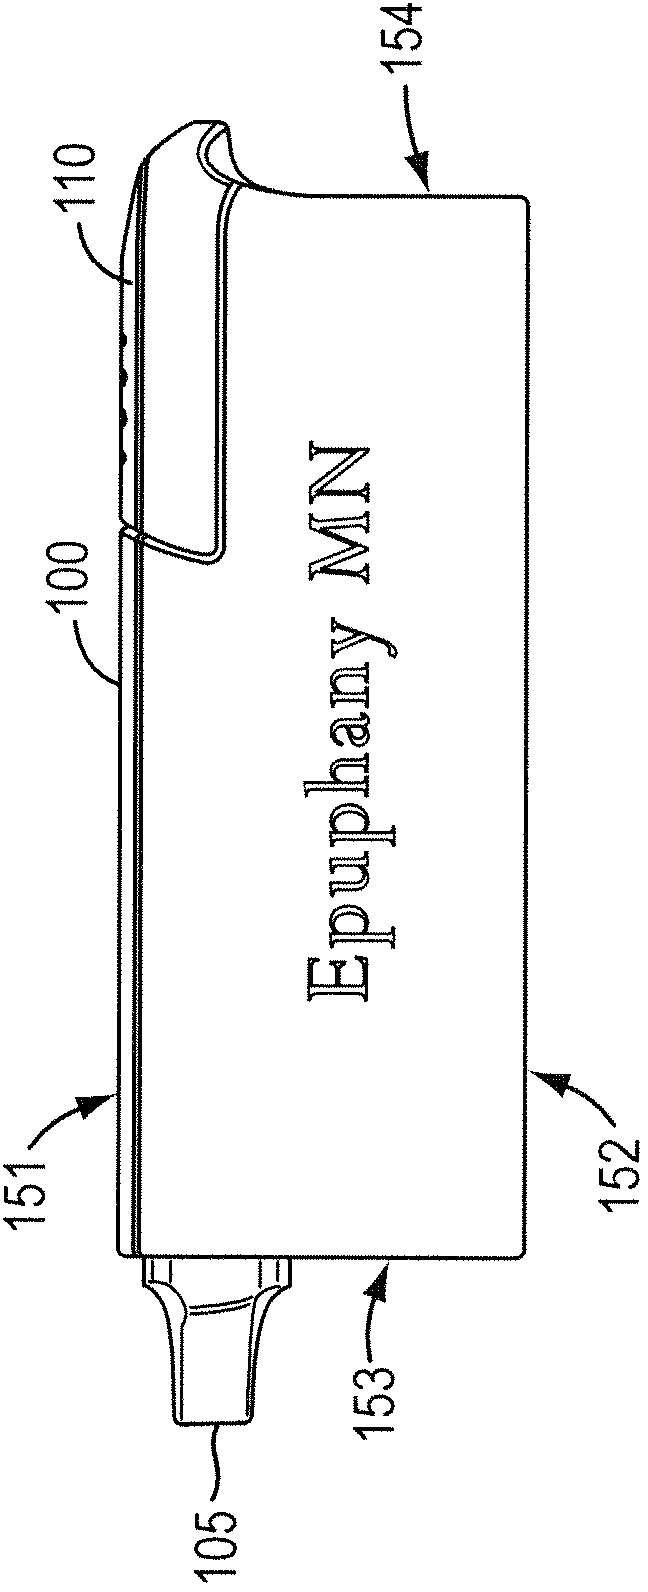 Smoke and odor elimination filters, devices and methods